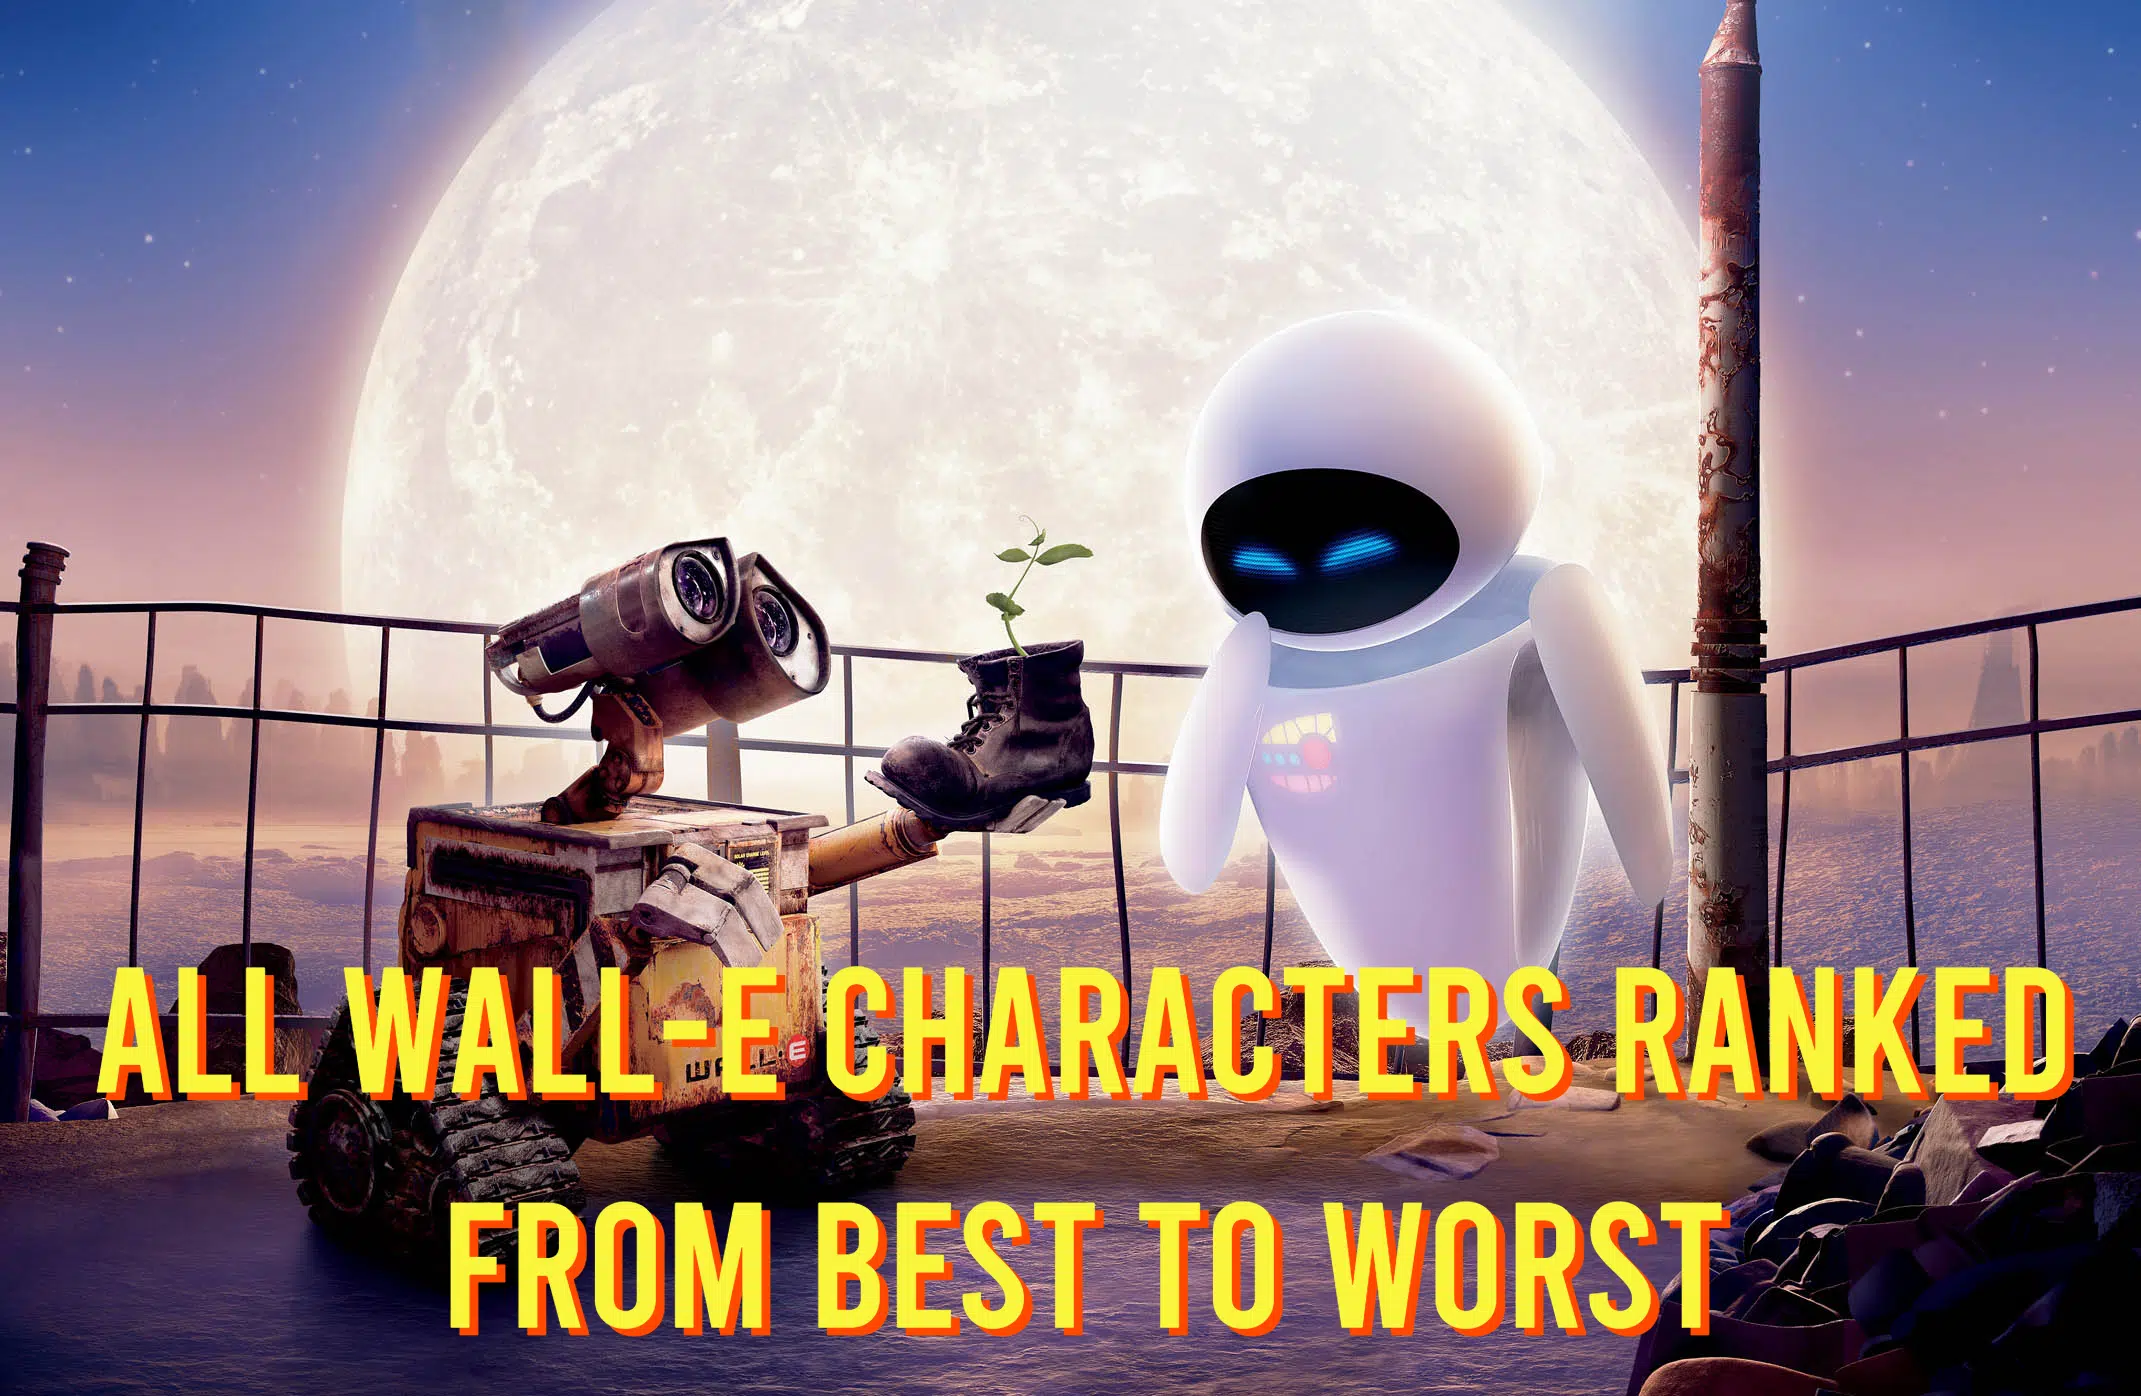 All WallE Characters Ranked From Best to Worst